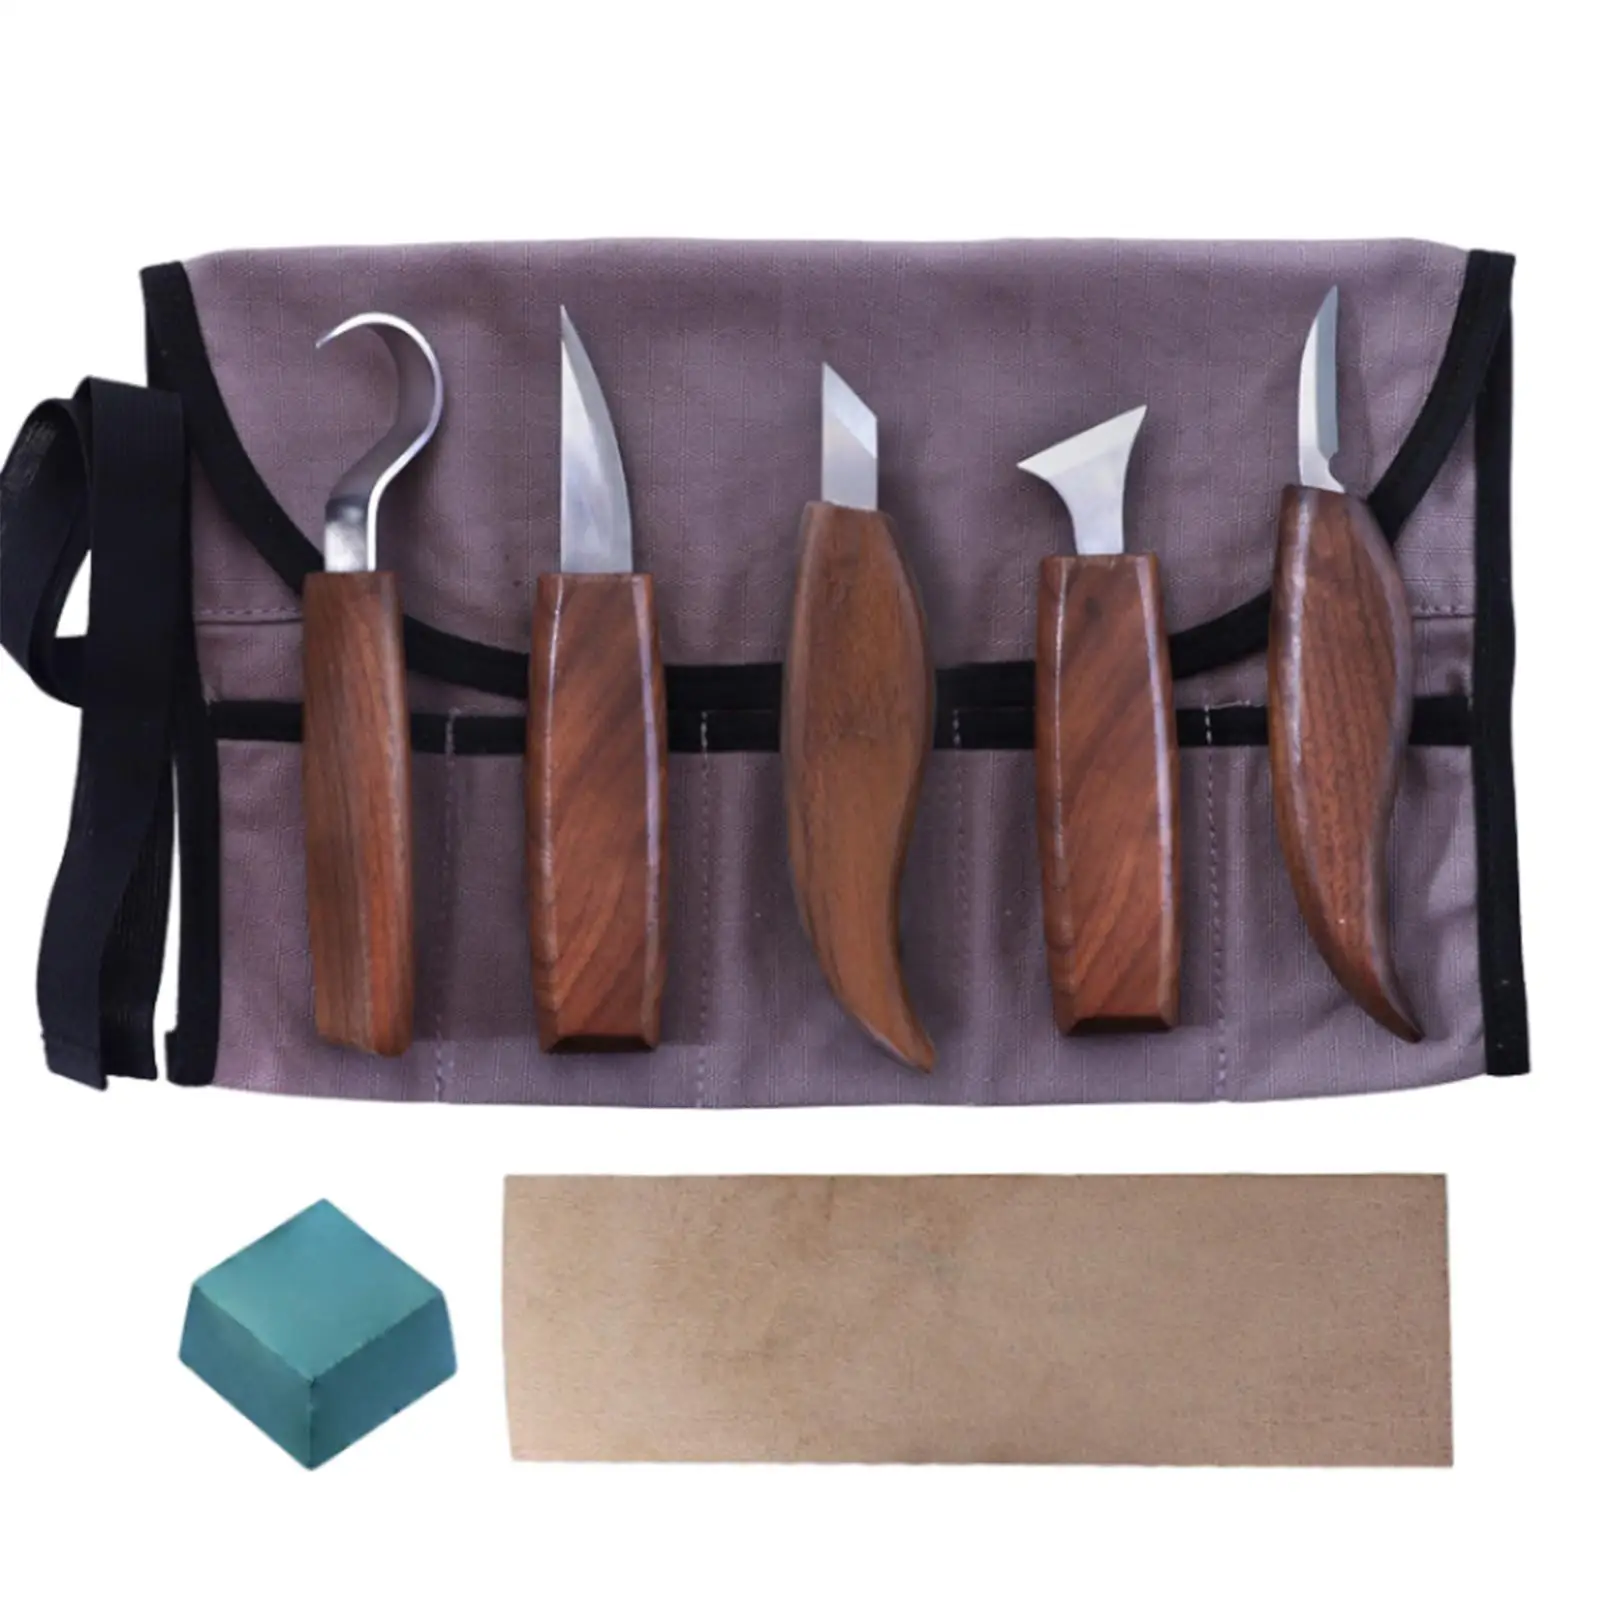 8 Pieces Woodworking DIY Carving Tool Durable Detailed Caving Beginners Whittling Kits for Paper Carving Fathers Gifts